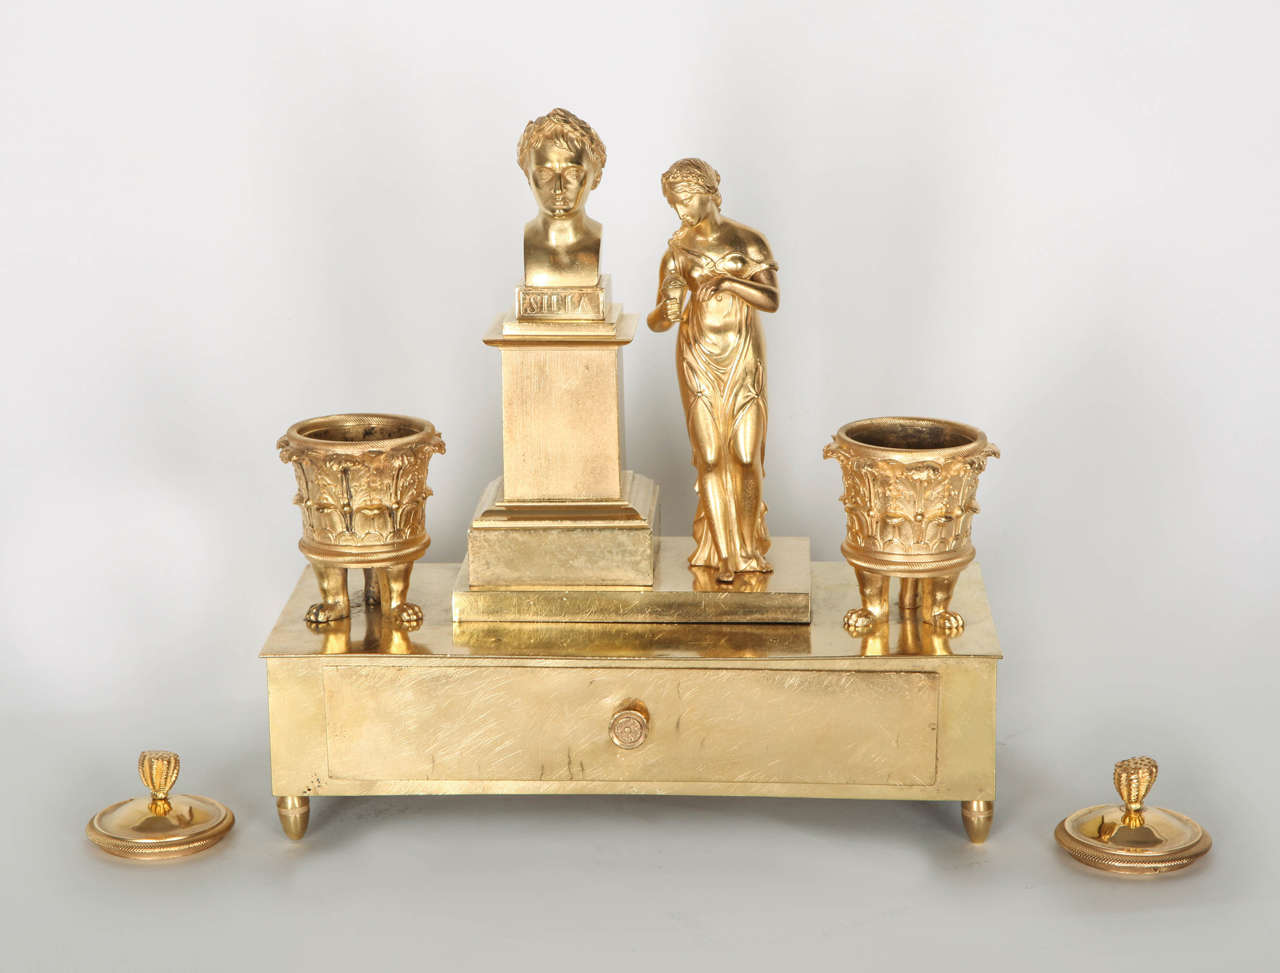 French Small Gilded Bronze Inkwell with the Bust of Silla, France, Late 19th Century